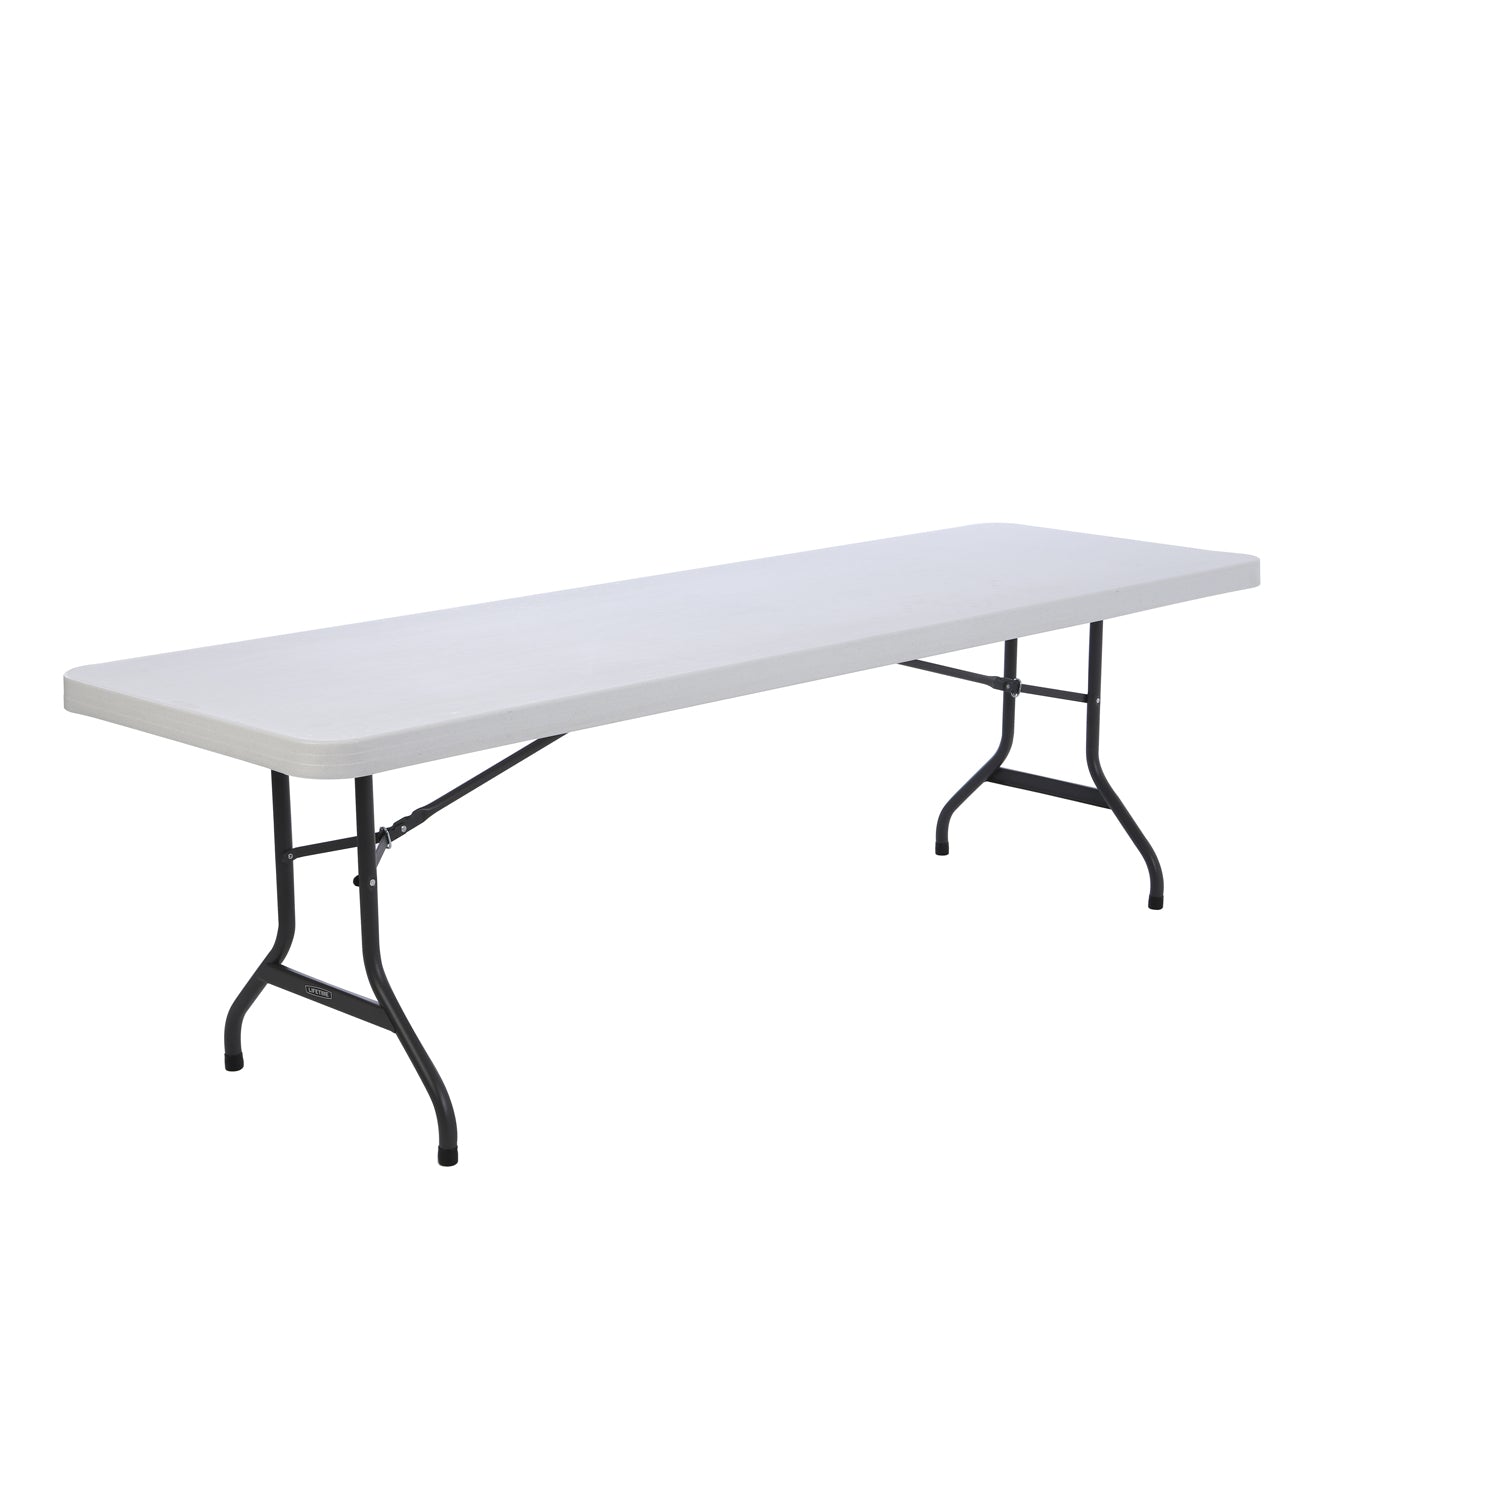 DIY Craft White Plastic Table Cover Roll-300 Feet Long (26 Colors) NO Folds  or CREASES (Super Fast Set UP)